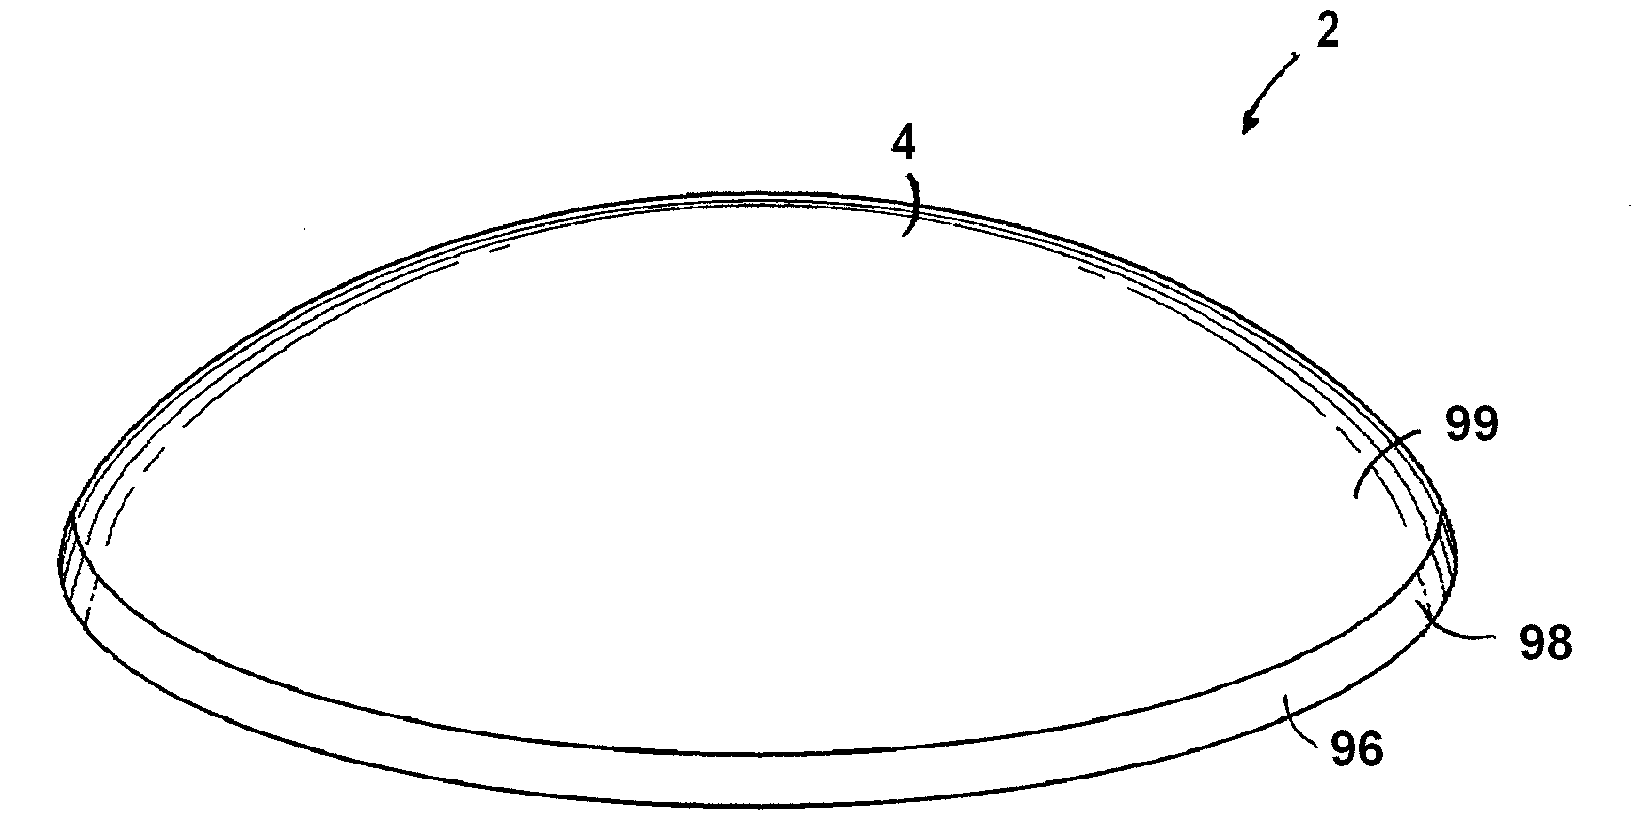 Breast implant with adjustable compression response